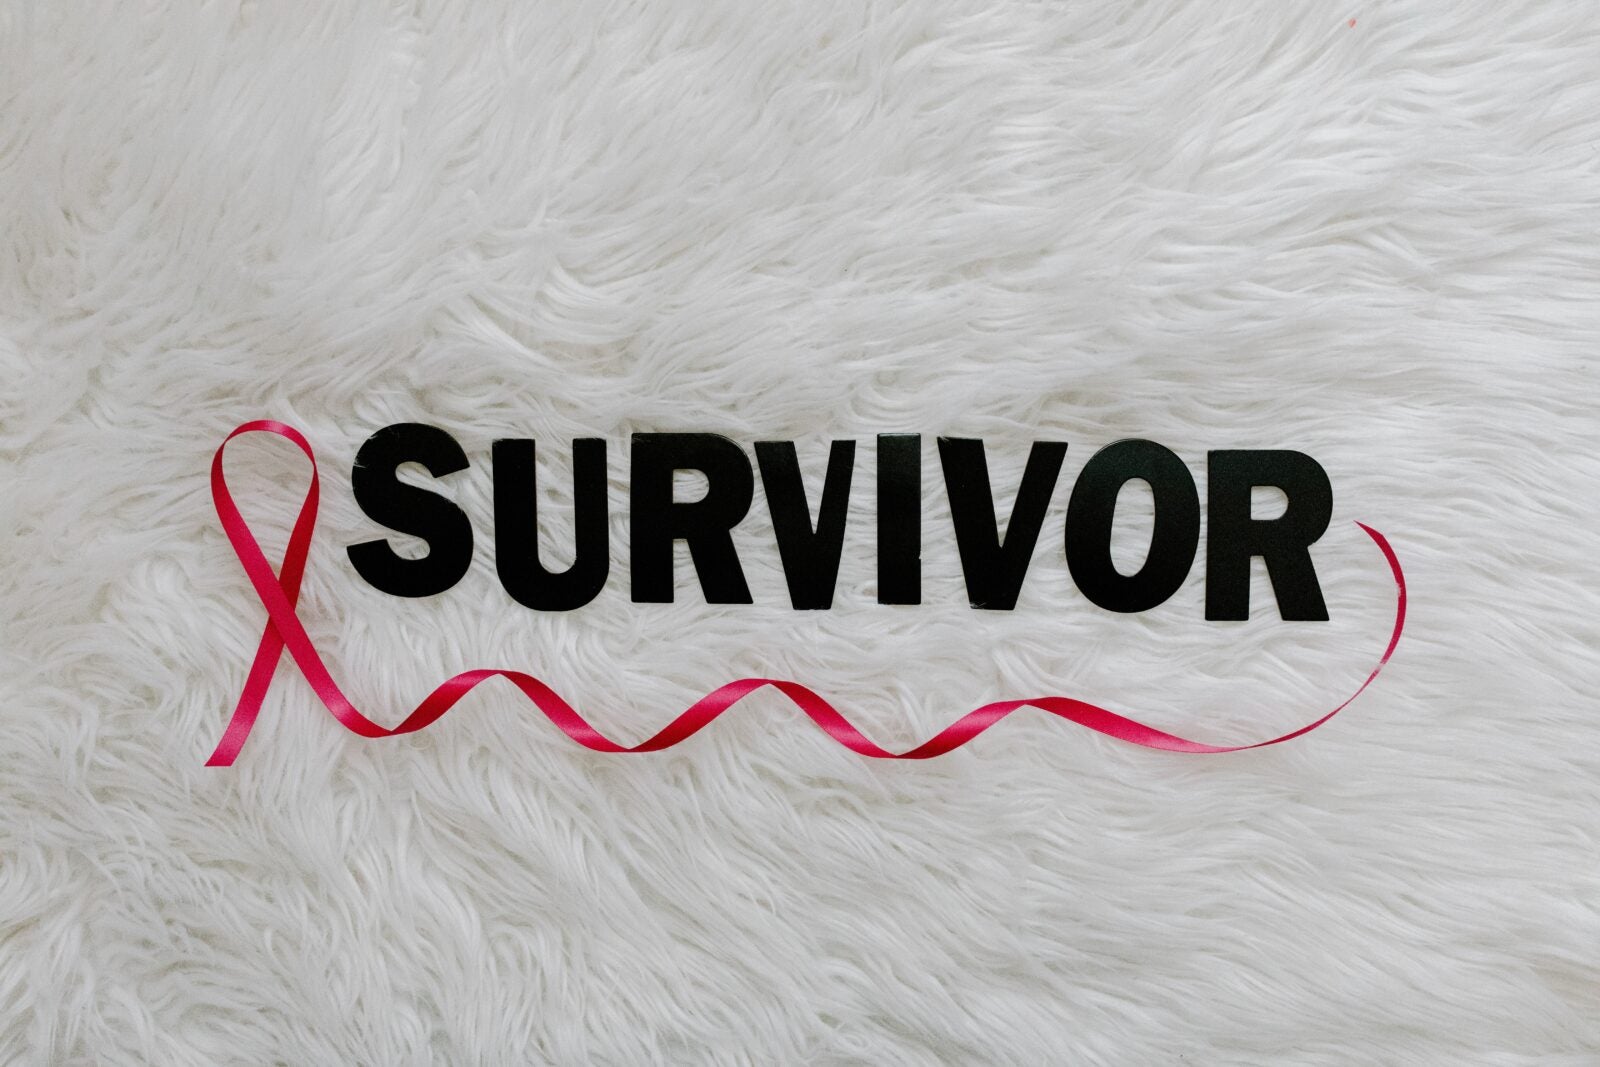 A pink ribbon and the word "Survivor" on a white fur carpet.